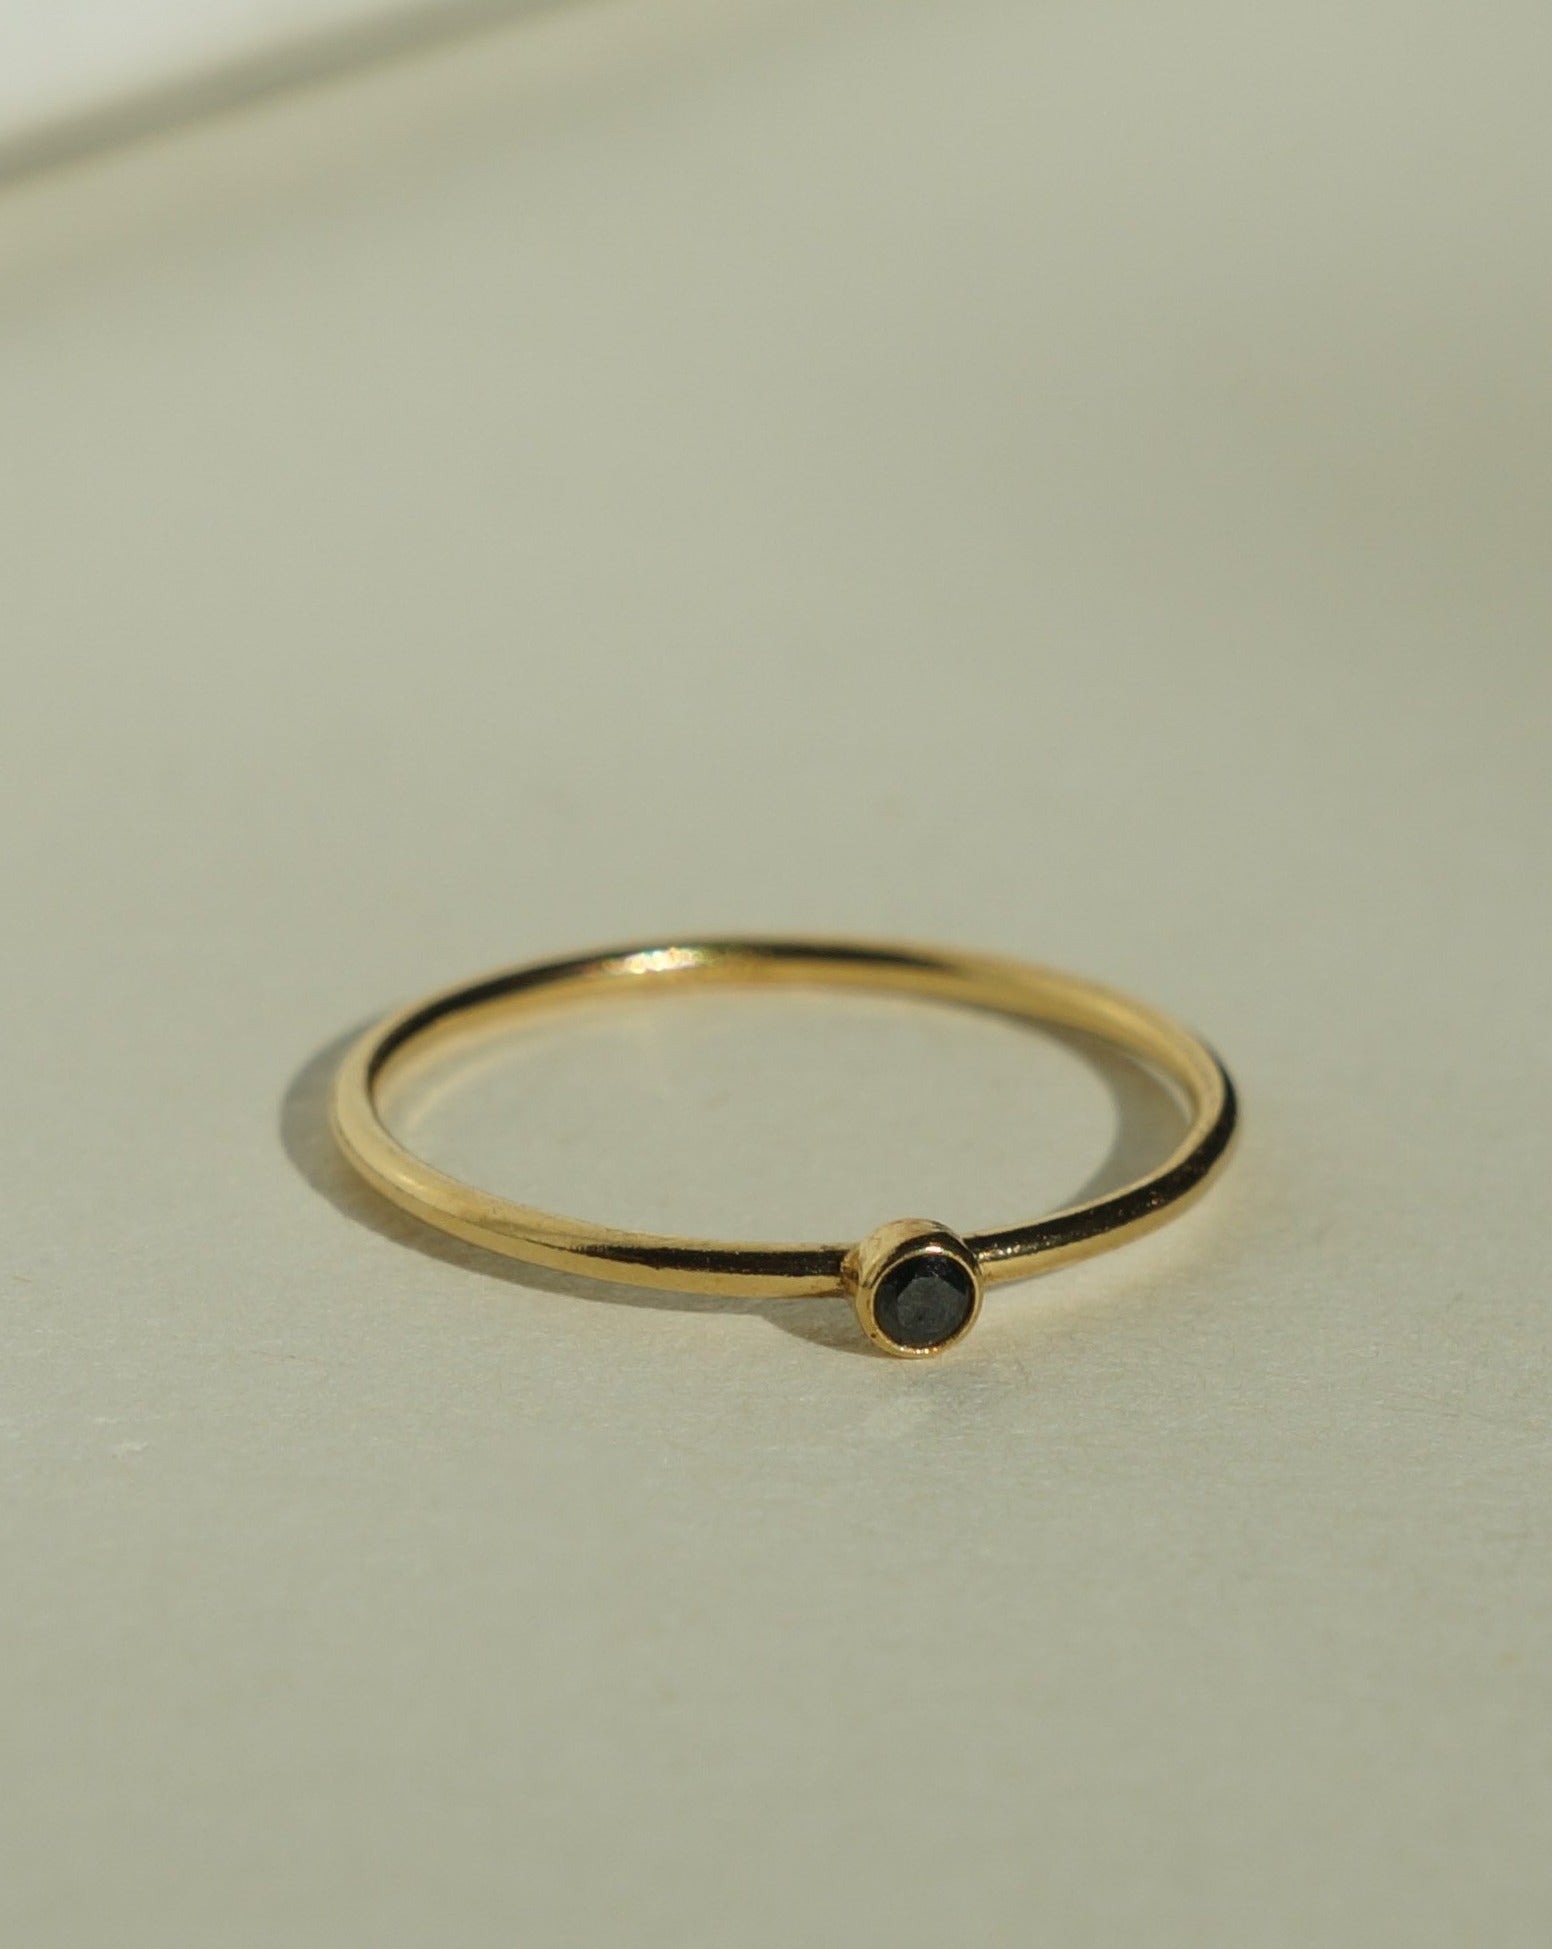 Dia Black Ring by KOZAKH. A 1mm thick ring, crafted in 14K Gold Filled, featuring a 2mm black Spinel bezel.